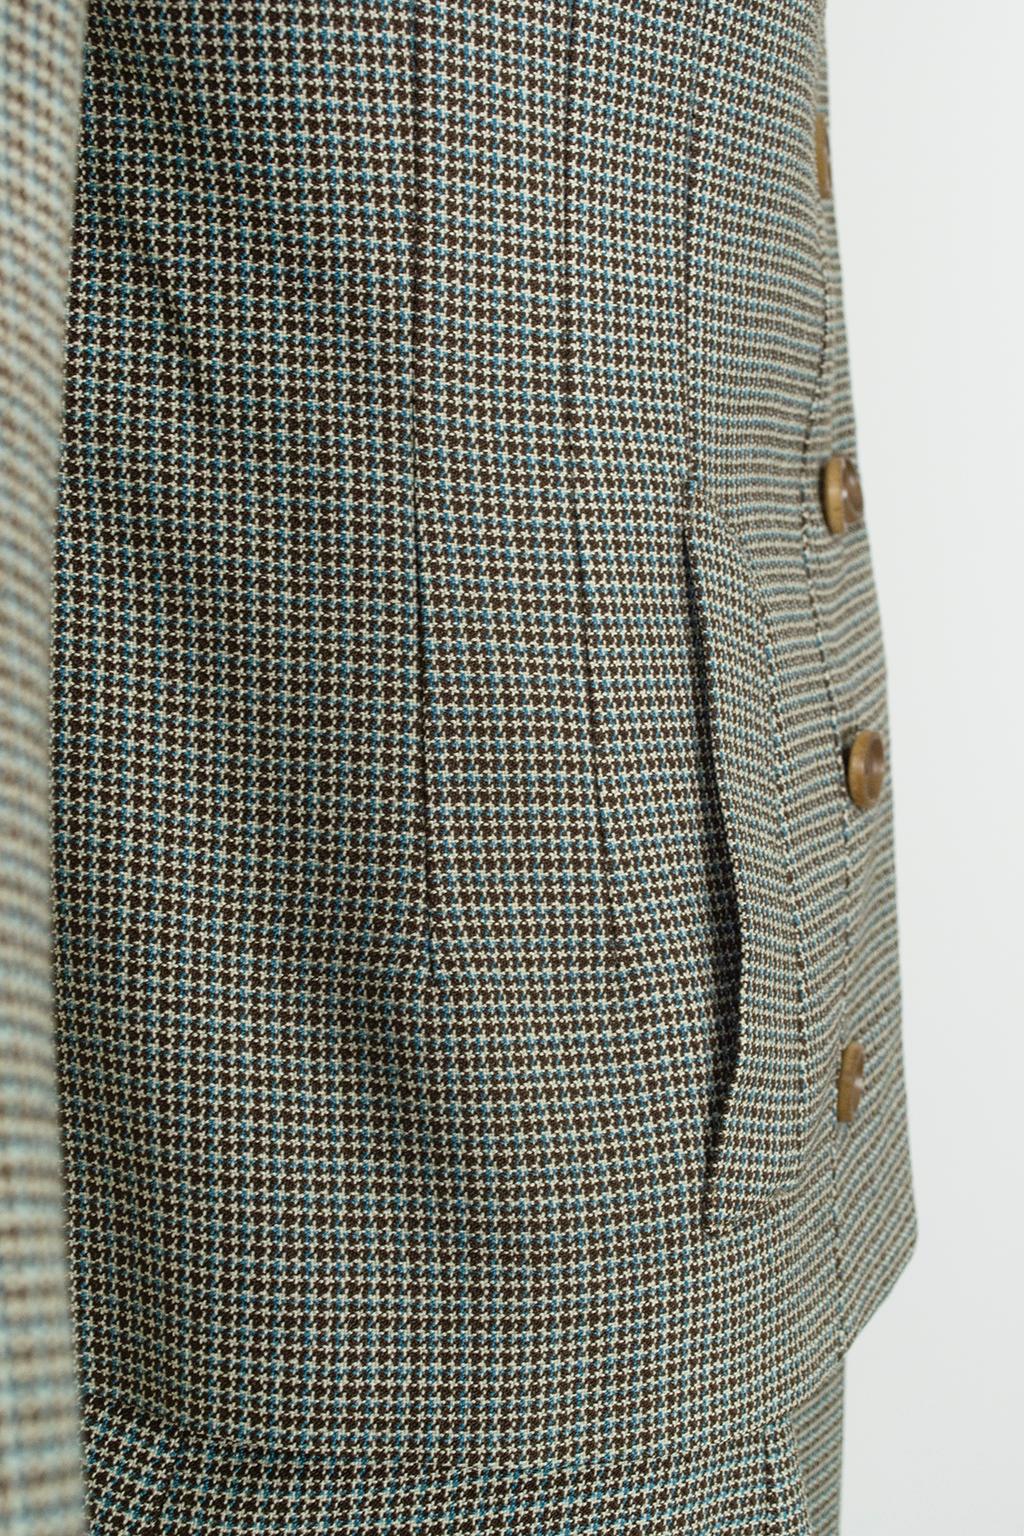 French Blue and Brown Houndstooth Cutaway Suit with Novelty Buttons – S-M, 1940s For Sale 4